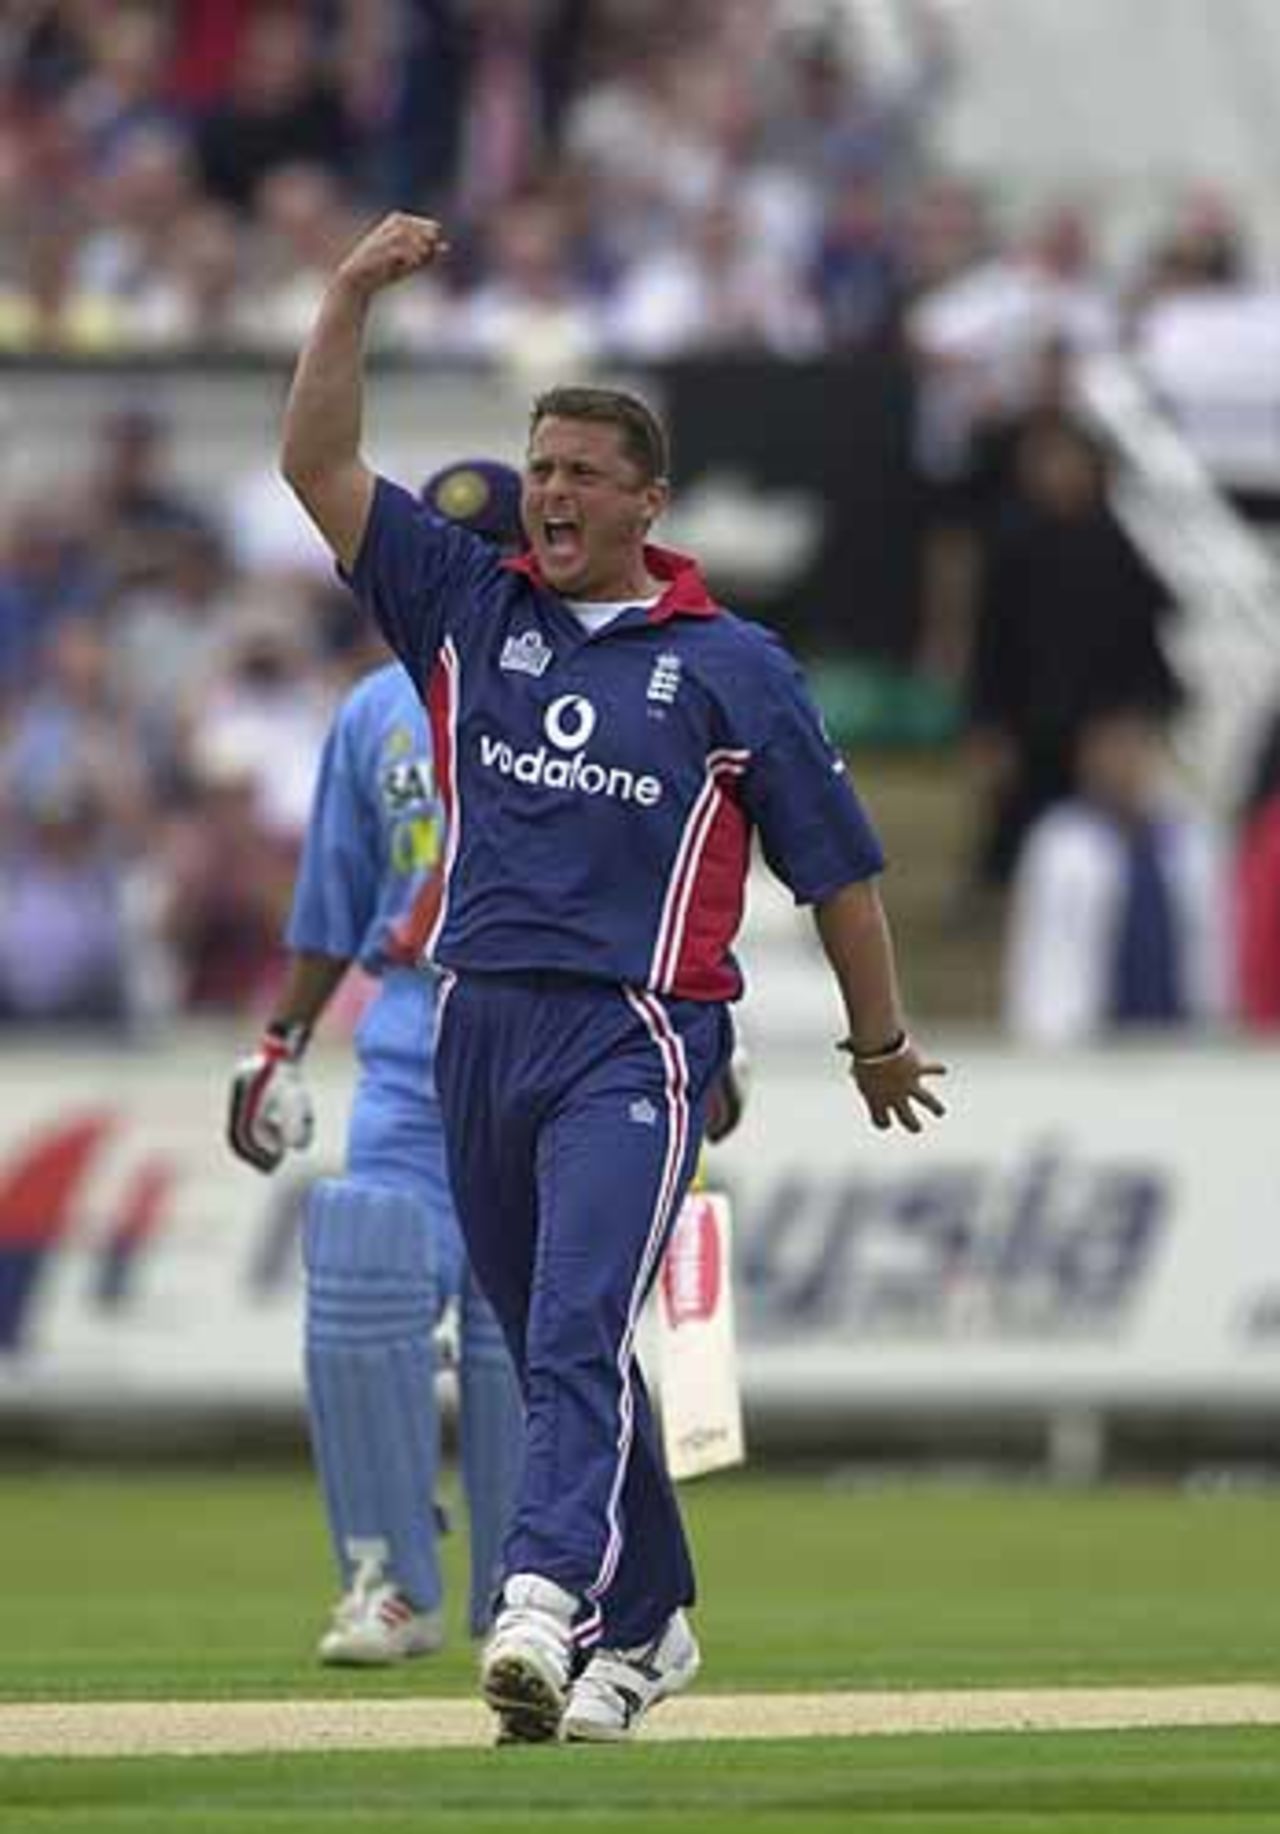 Darren Gough has Ganguly lbw with the first ball of the match, England v India at Chester-le-Street, July 2002